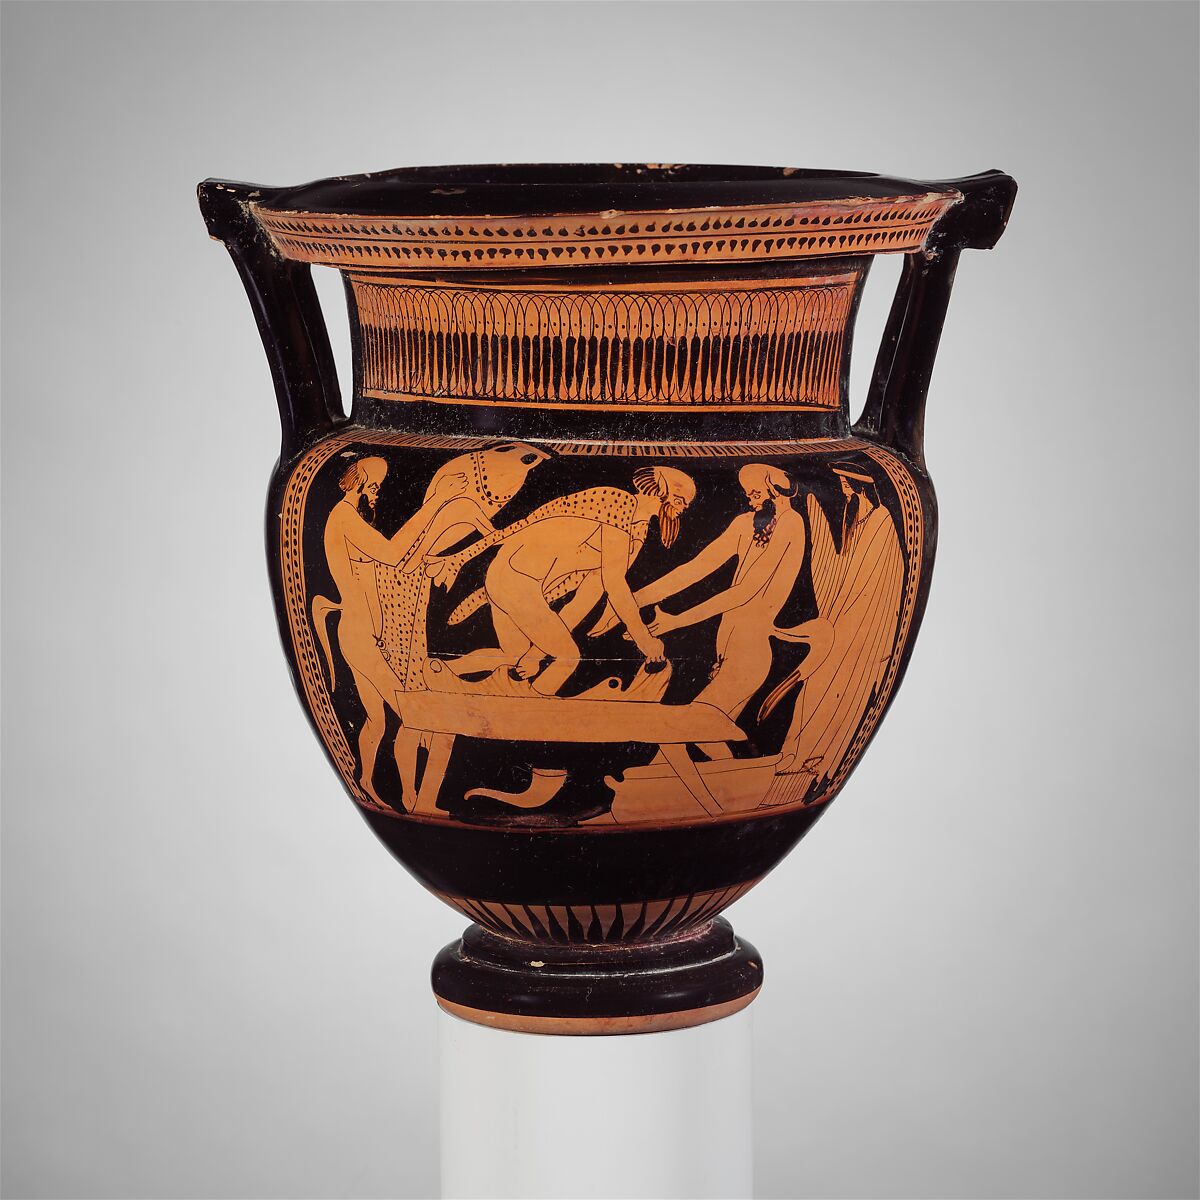 Terracotta column-krater (bowl for mixing wine and water), Attributed to the Cleveland Painter, Terracotta, Greek, Attic 